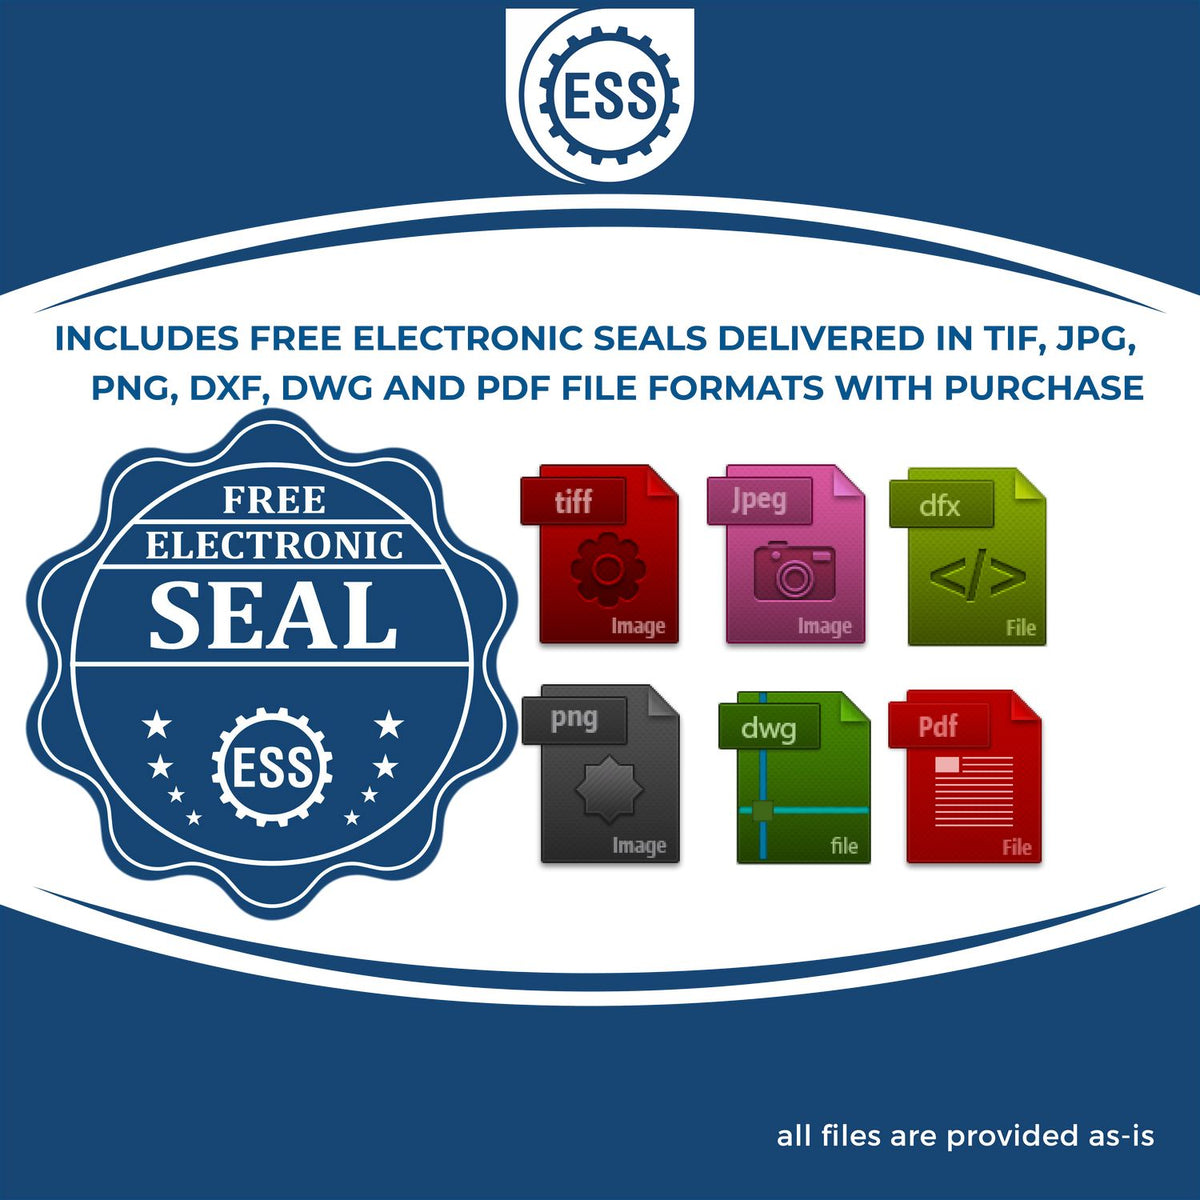 An infographic for the free electronic seal for the Gift Georgia Architect Seal illustrating the different file type icons such as DXF, DWG, TIF, JPG and PNG.